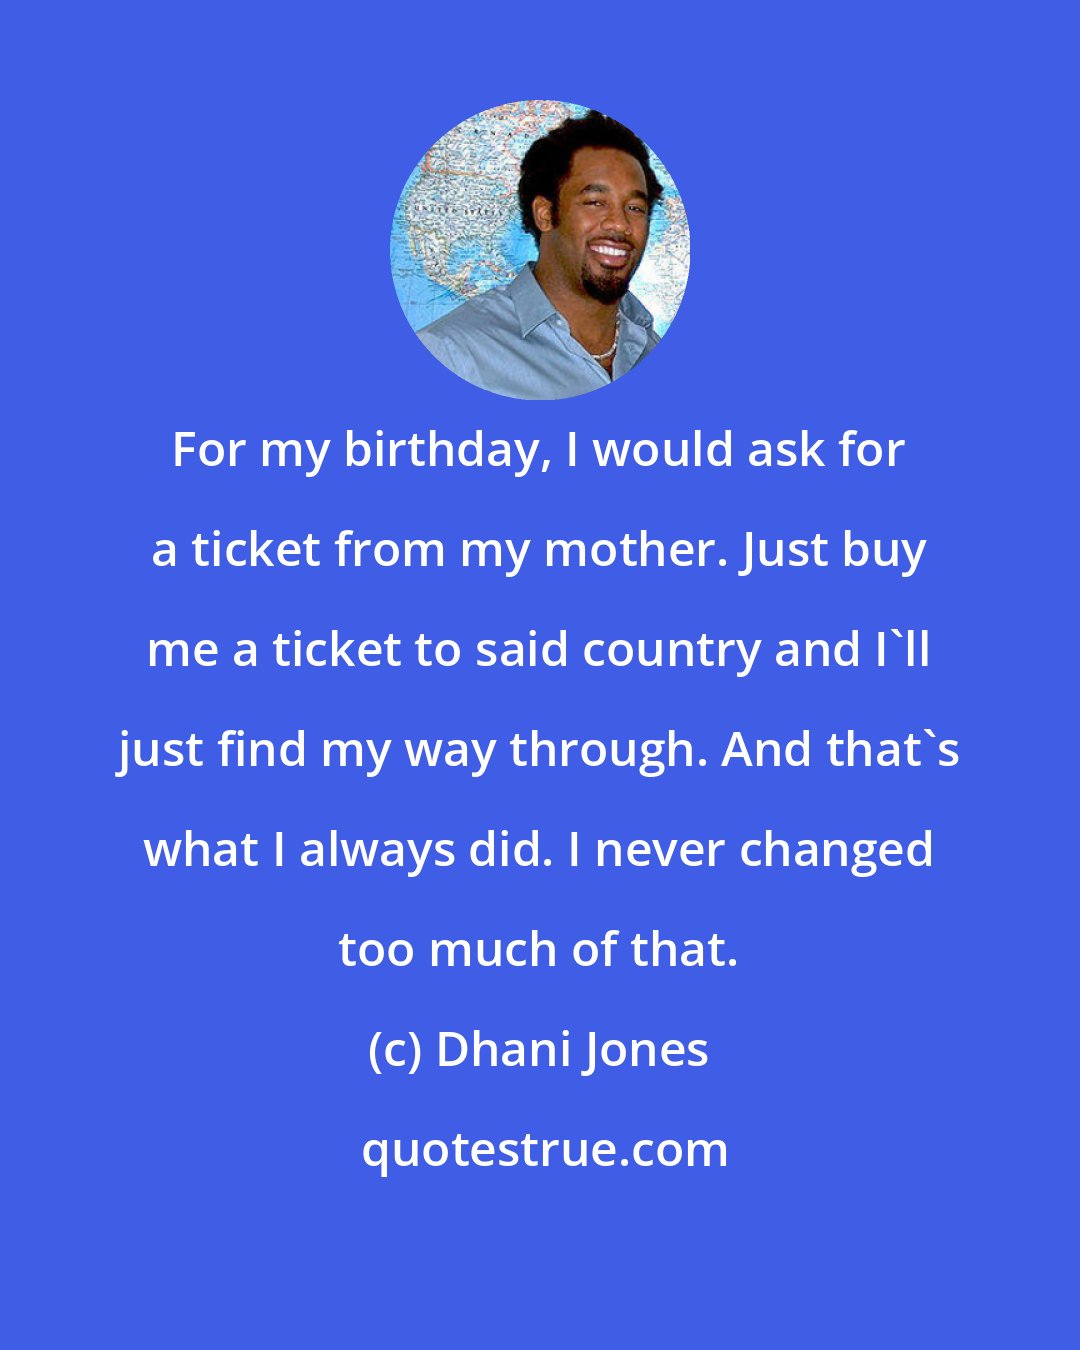 Dhani Jones: For my birthday, I would ask for a ticket from my mother. Just buy me a ticket to said country and I'll just find my way through. And that's what I always did. I never changed too much of that.